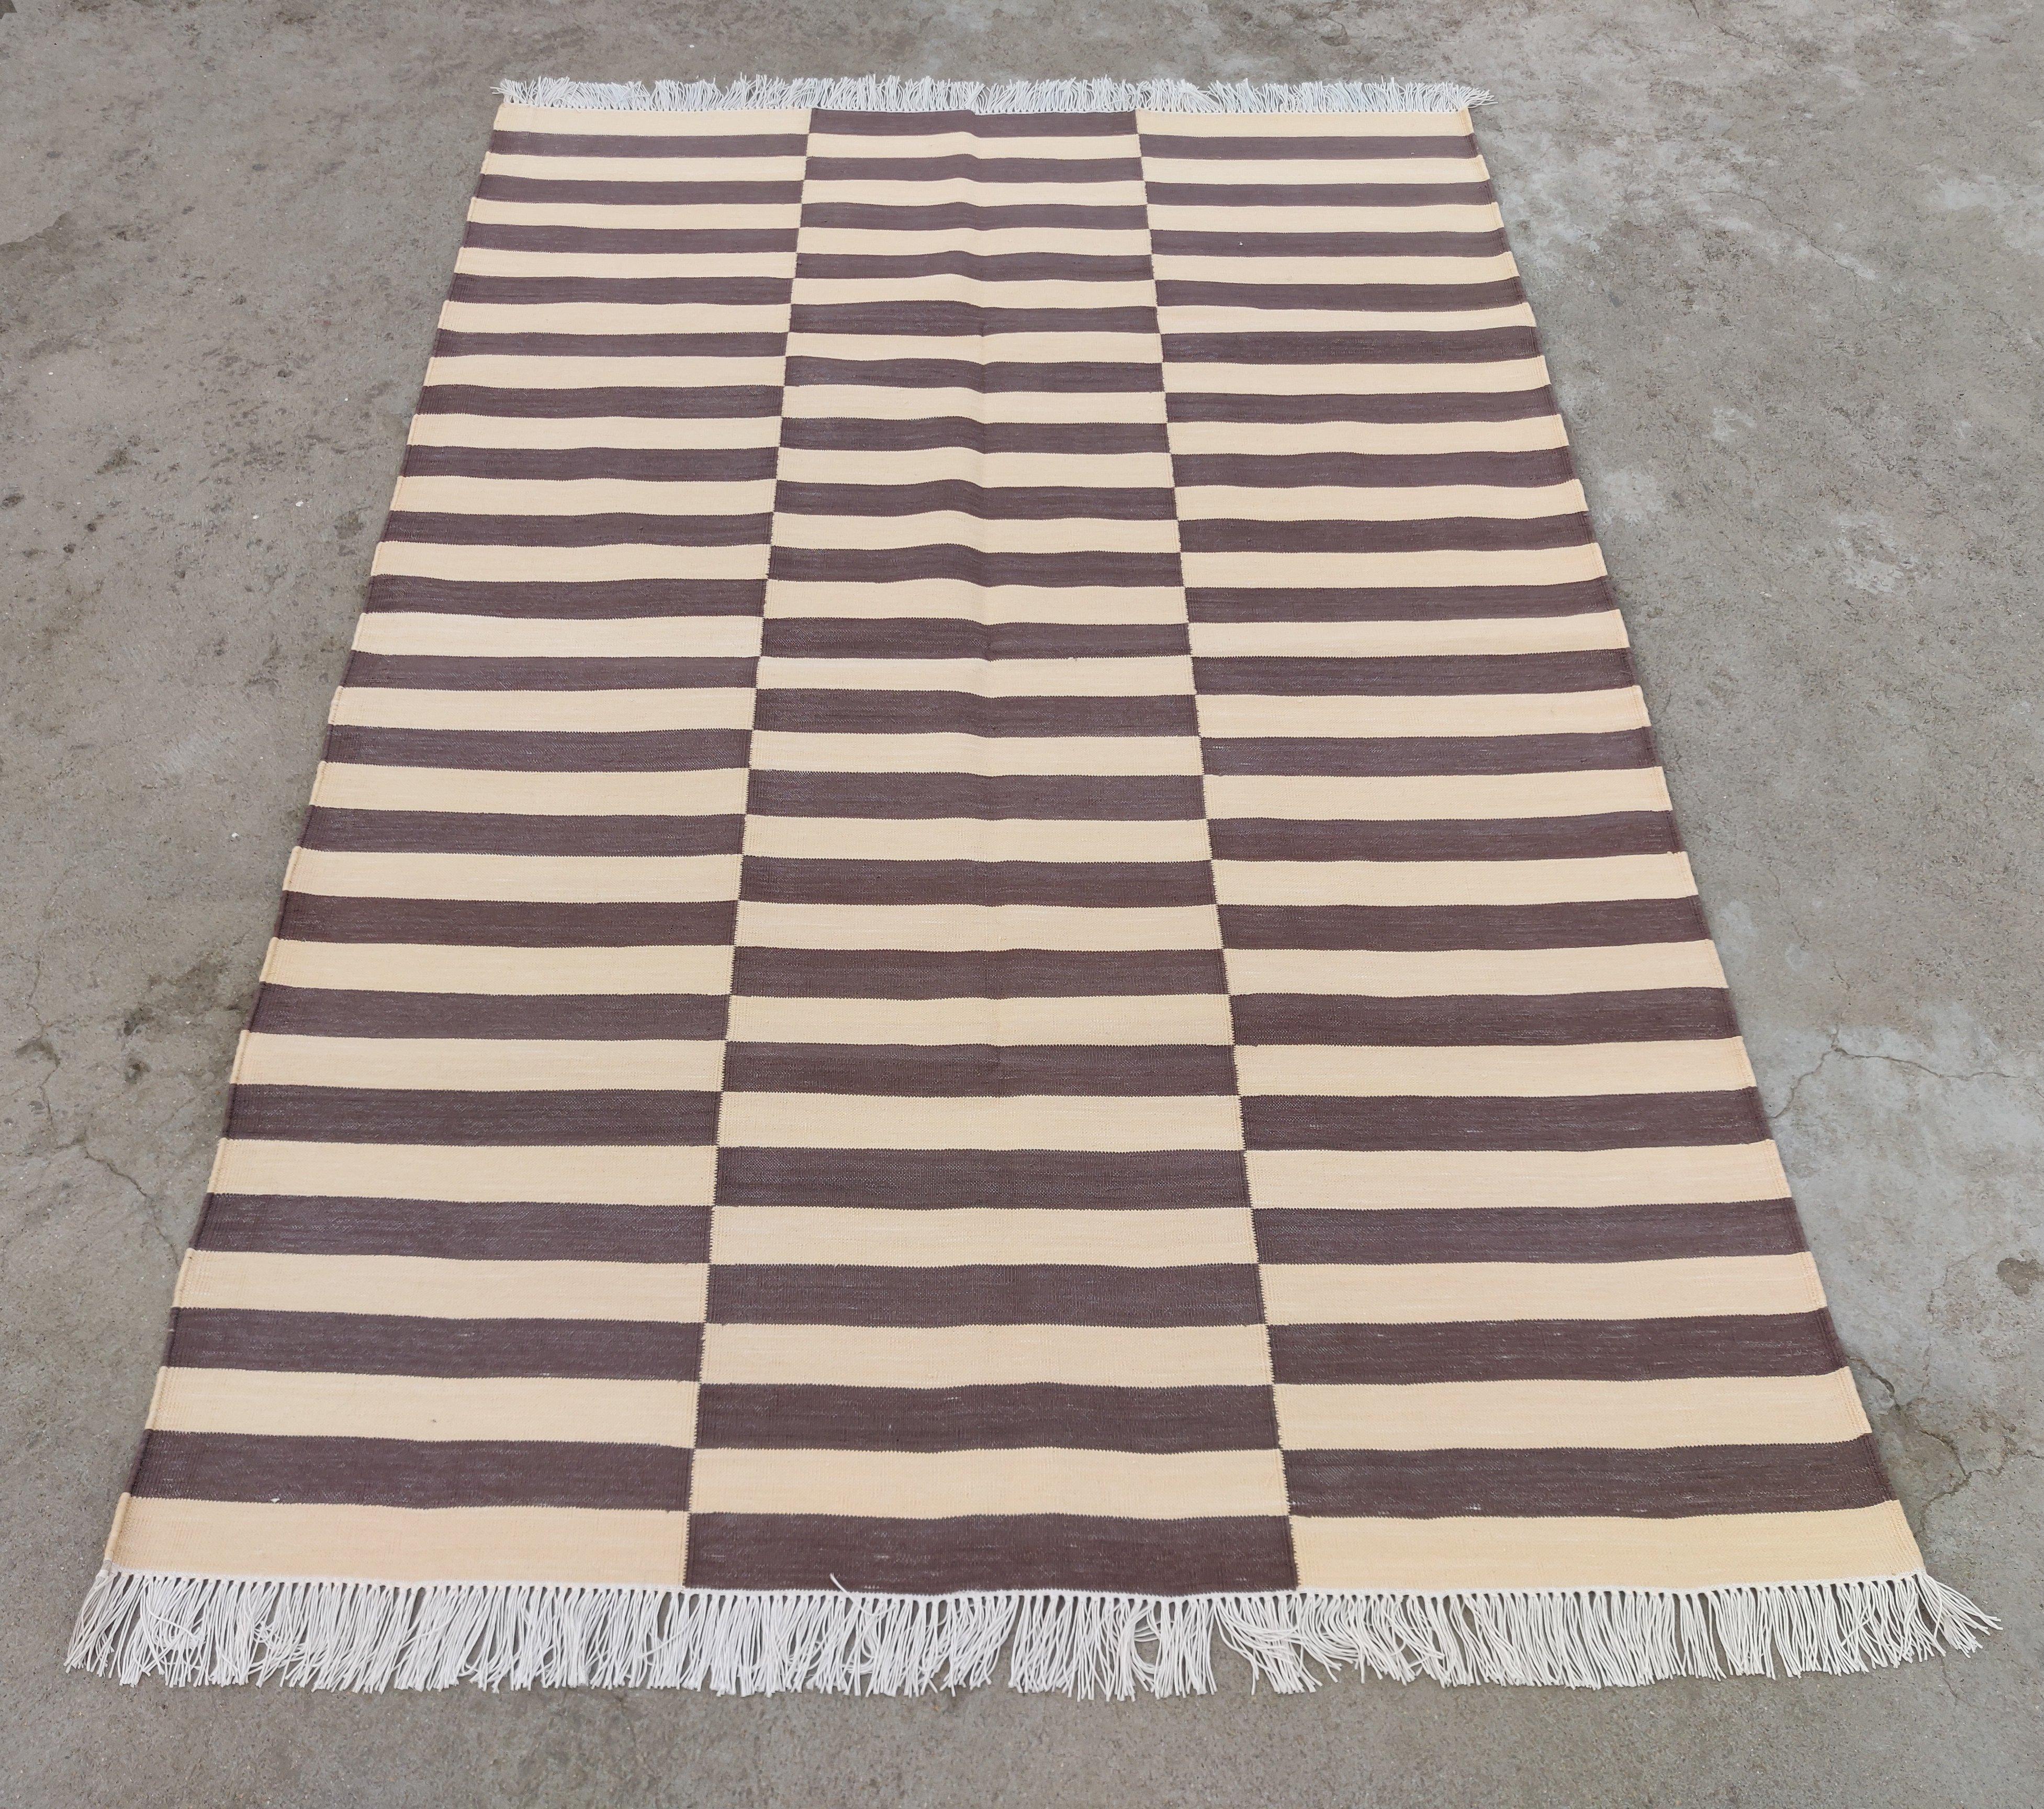 Handmade Cotton Area Flat Weave Rug, 4x6 Brown And Cream Striped Indian Dhurrie In New Condition For Sale In Jaipur, IN